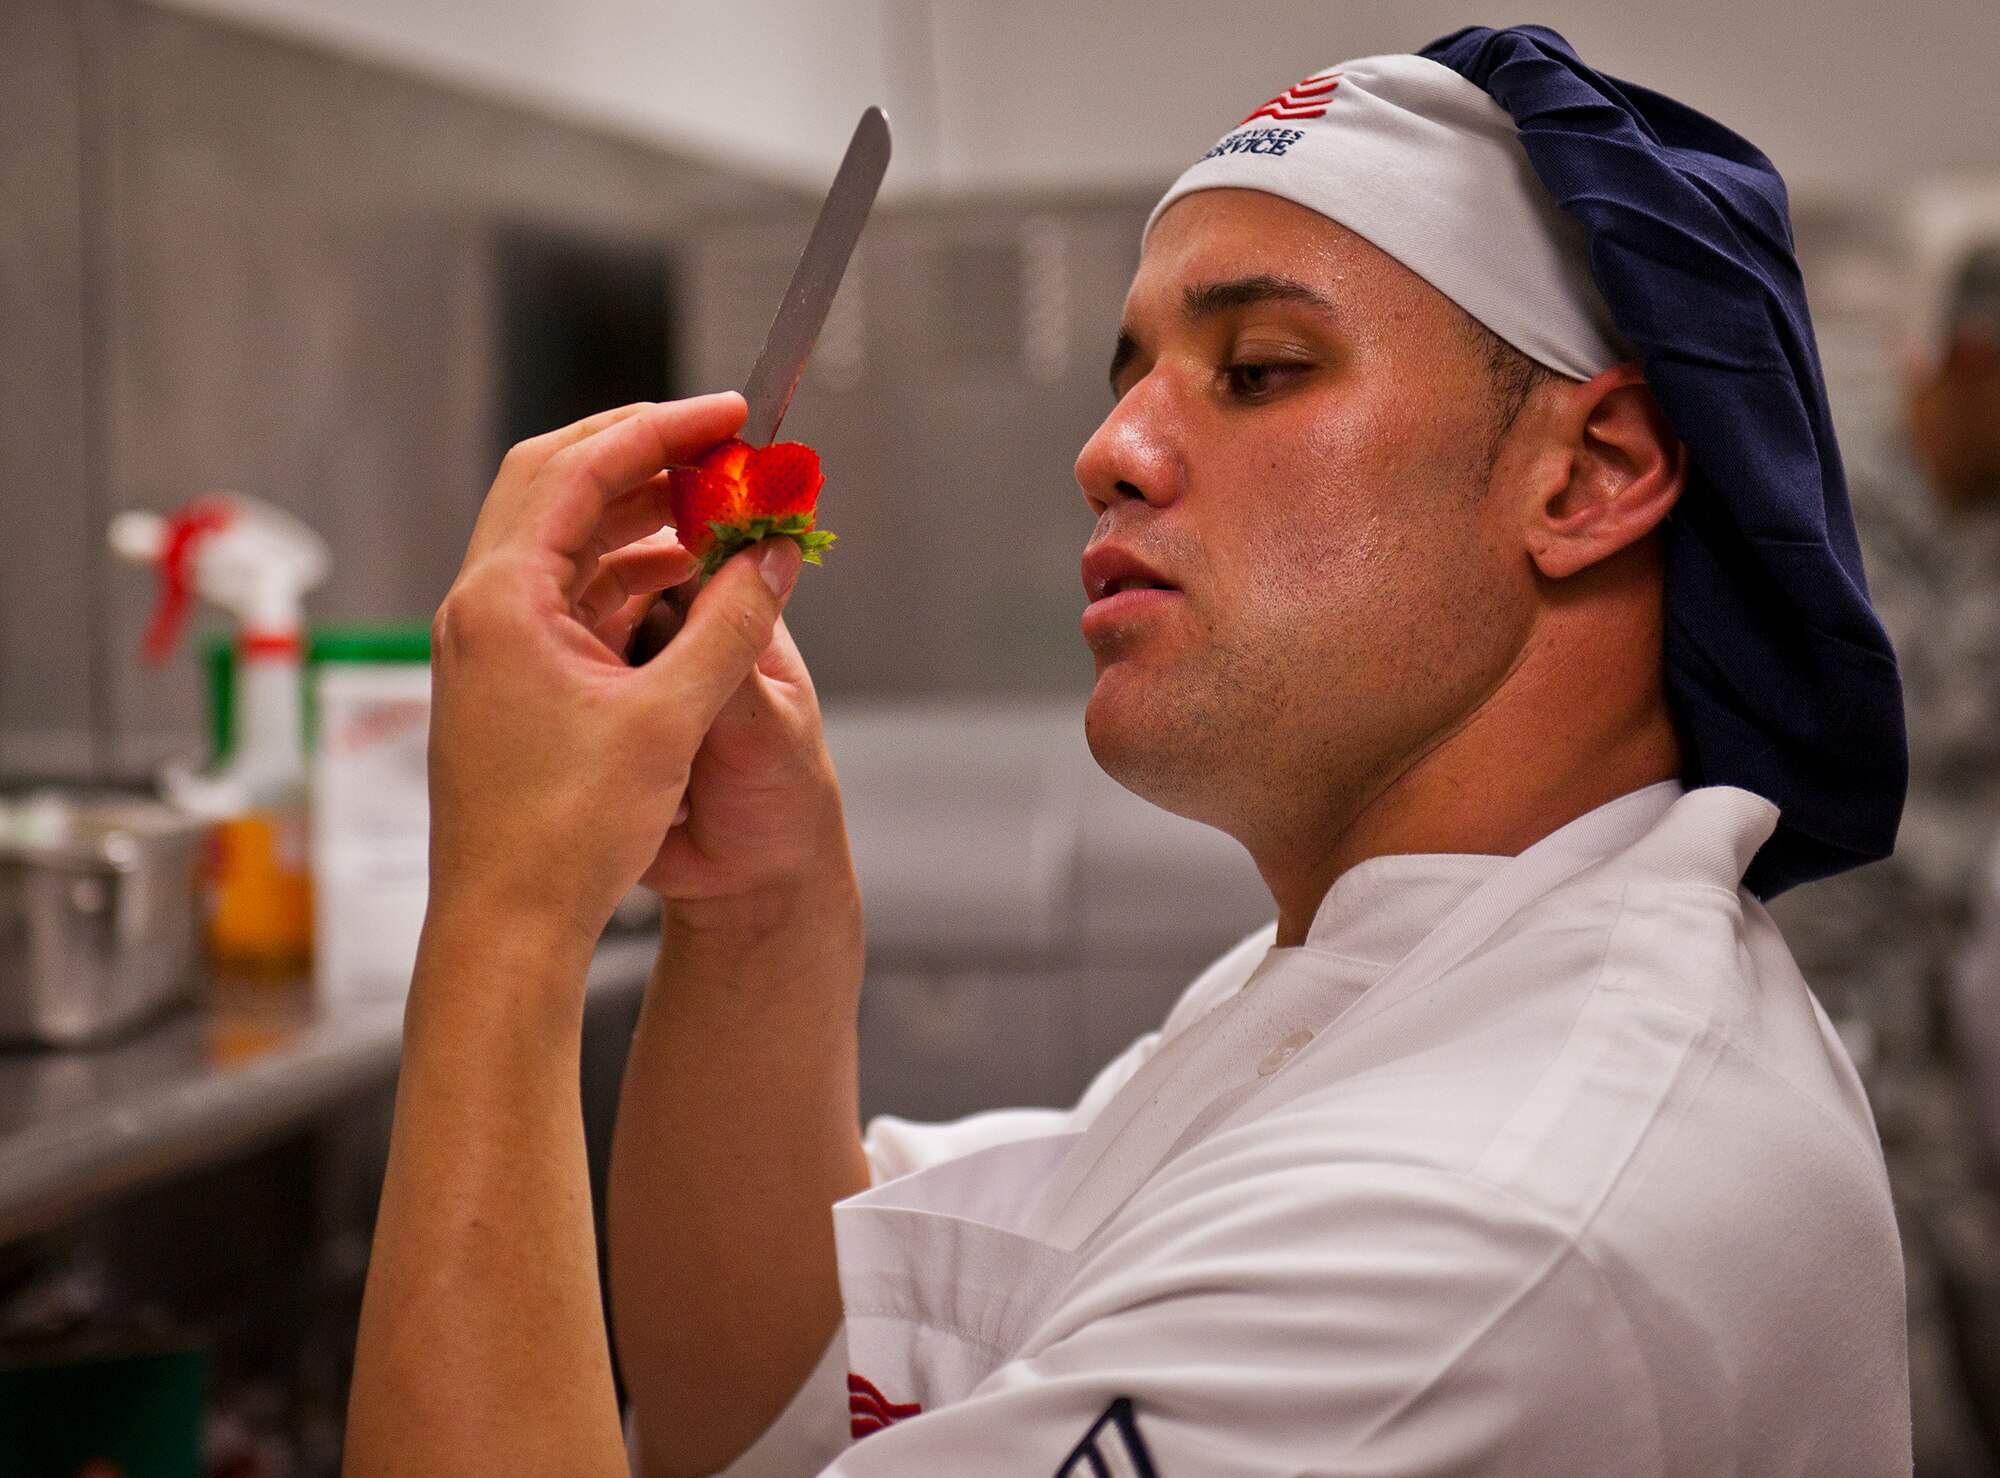 Airman 1st Class Giancarlo Martini cuts a decorative pattern into a strawberry during his meal preparation for the base’s first “Chopped” cooking competition July 24 at Eglin.  Five Airmen from the 96th Force Support Squadron had an hour to cook a meal with three secret ingredients.  Martini placed second in the competition.  (U.S. Air Force photo/Samuel King Jr.)